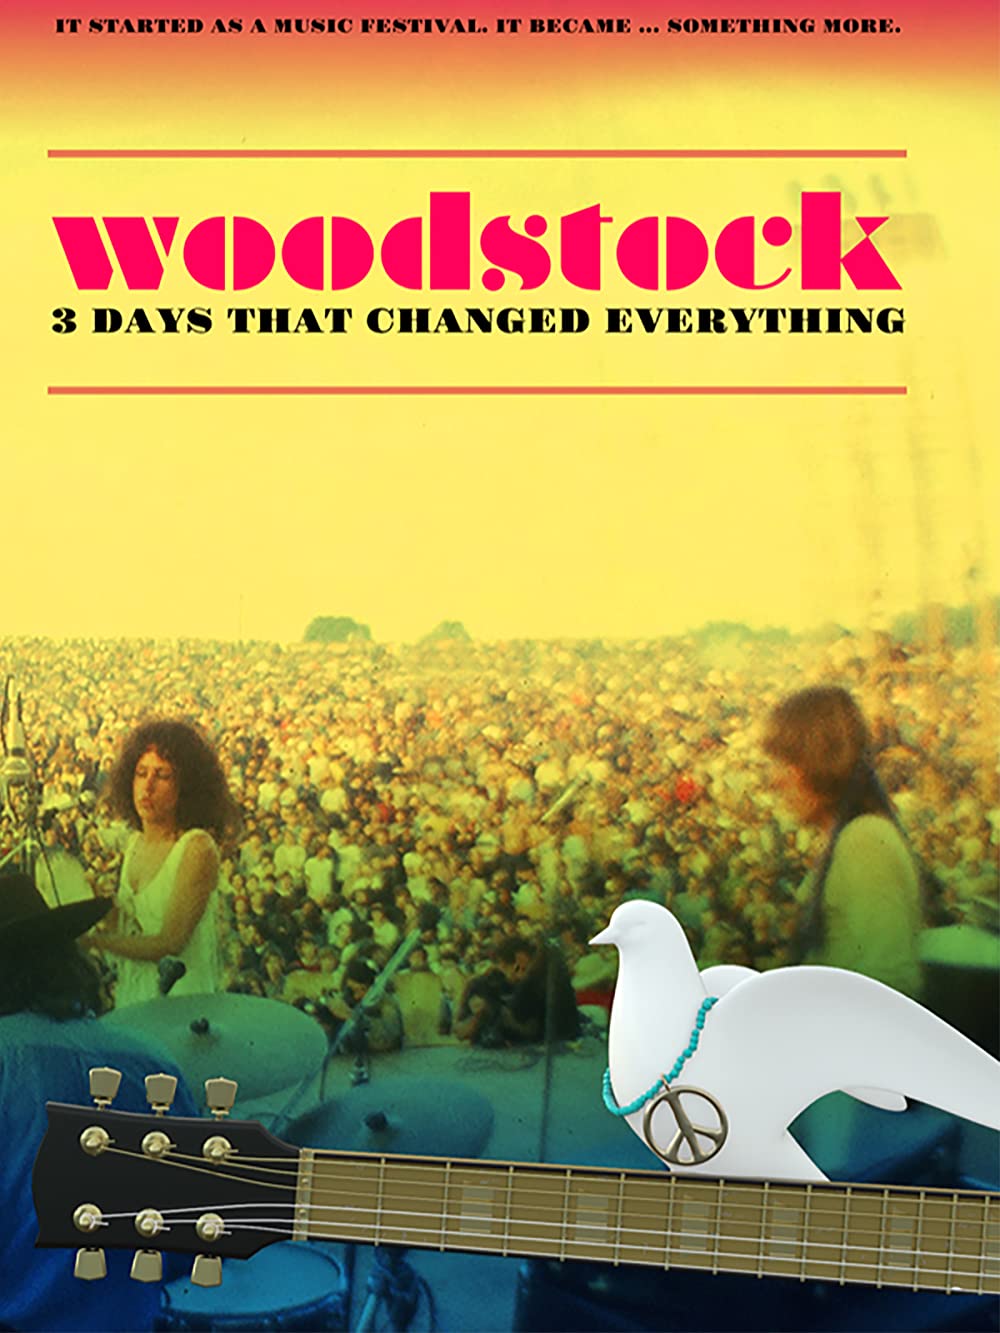 HERPOST Woodstock - 3 Days That Changed Everything (2019)